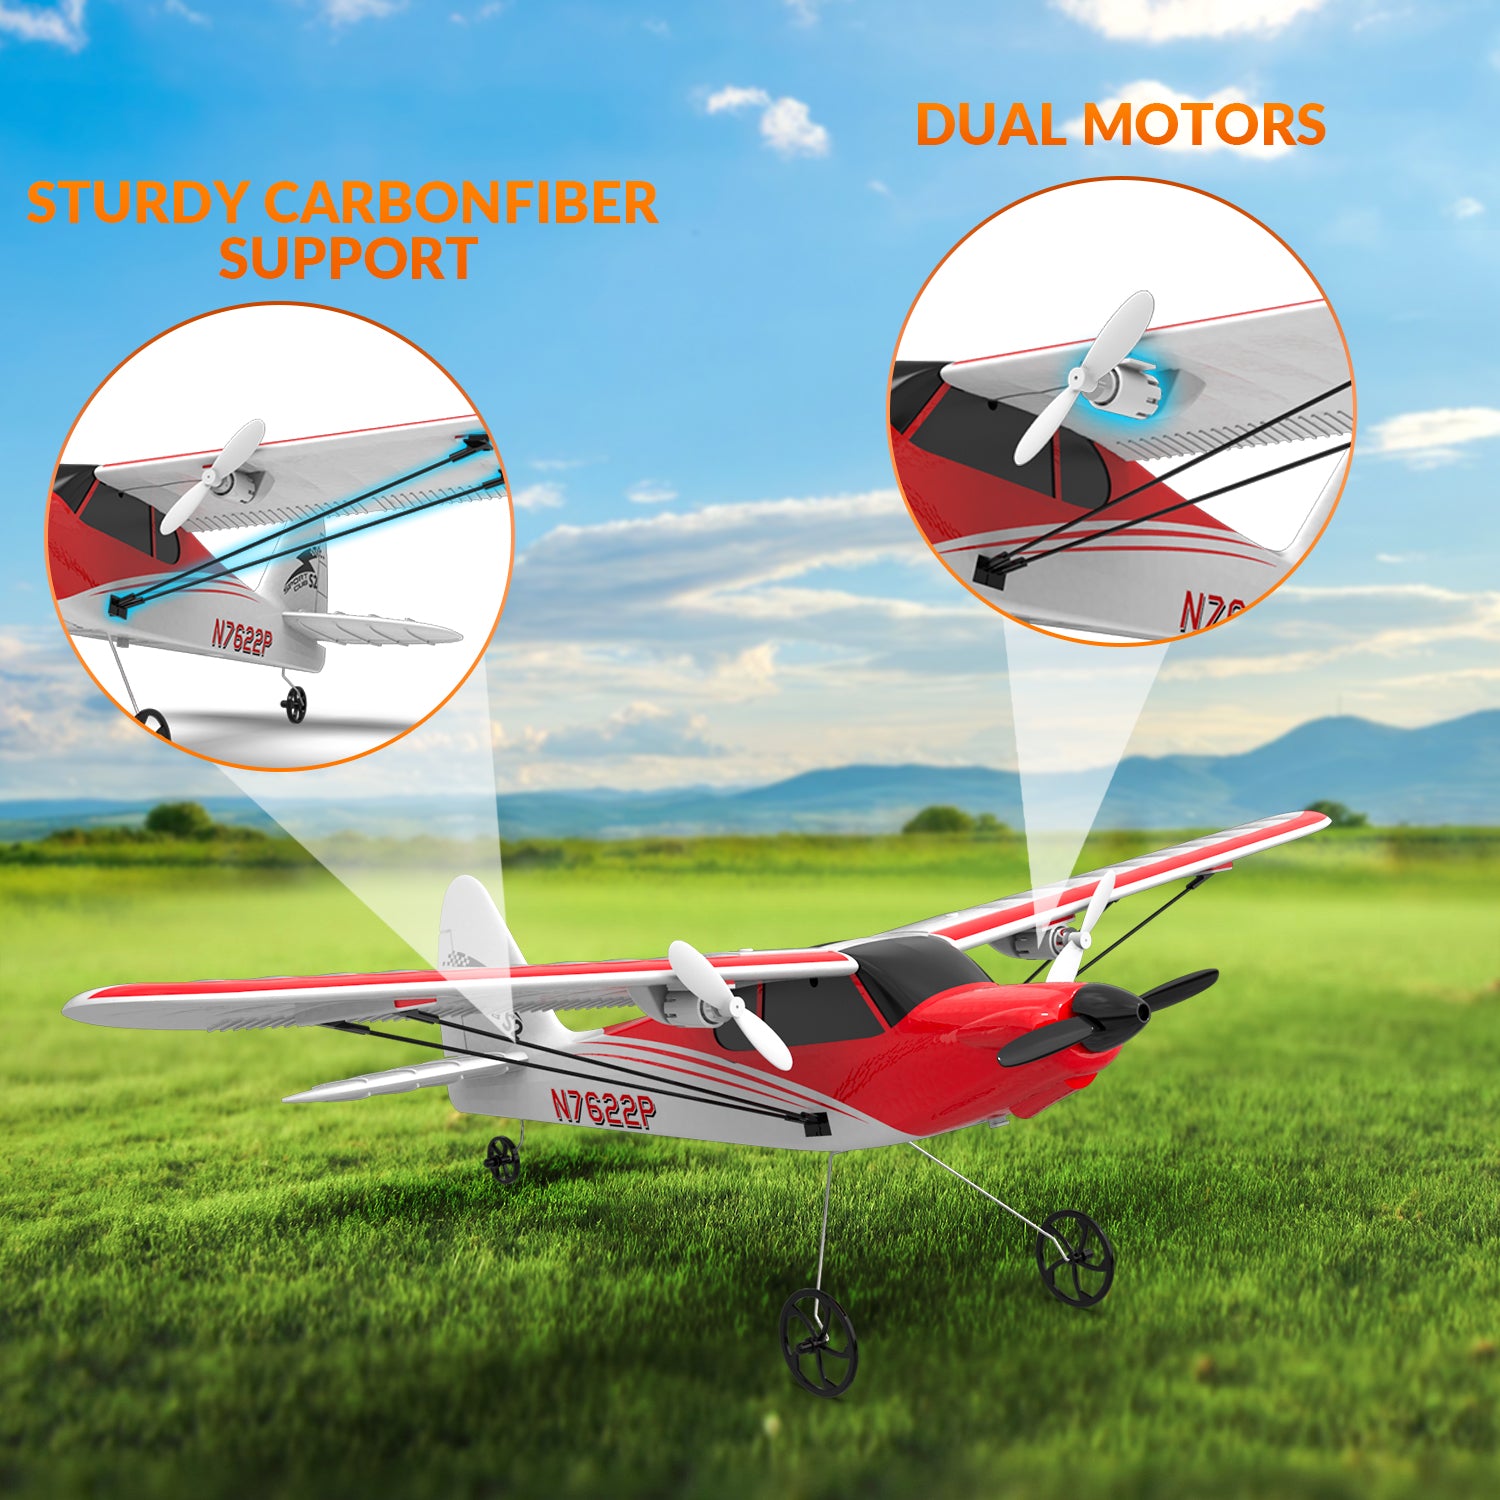 VOLANTEXRC Sport Cub S2 RC Plane with Gyro Stabilization System Ready to Fly for Beginners, 2.4Ghz 2-CH Remote Control Airplane RTF  (762-2)